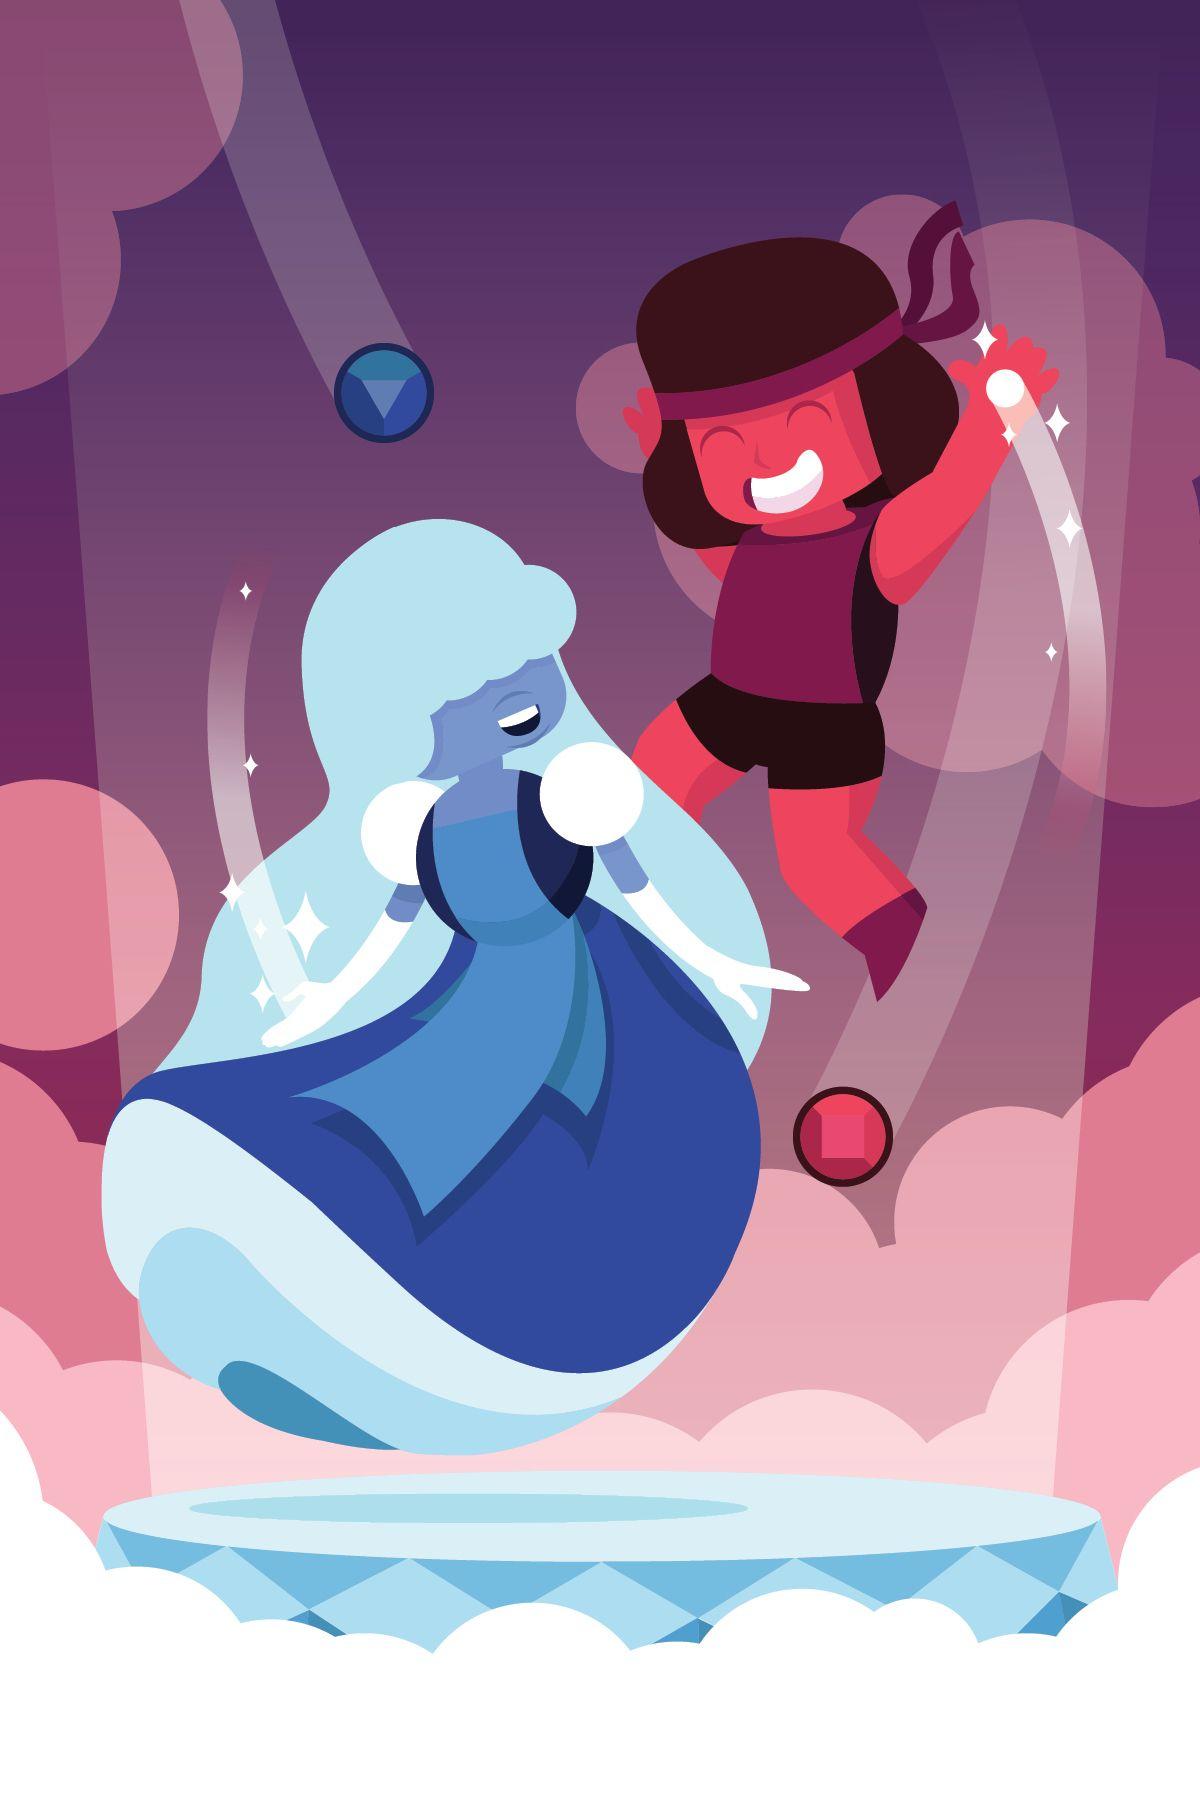 Ruby and sapphire. Steven universe, Star vs the forces of evil